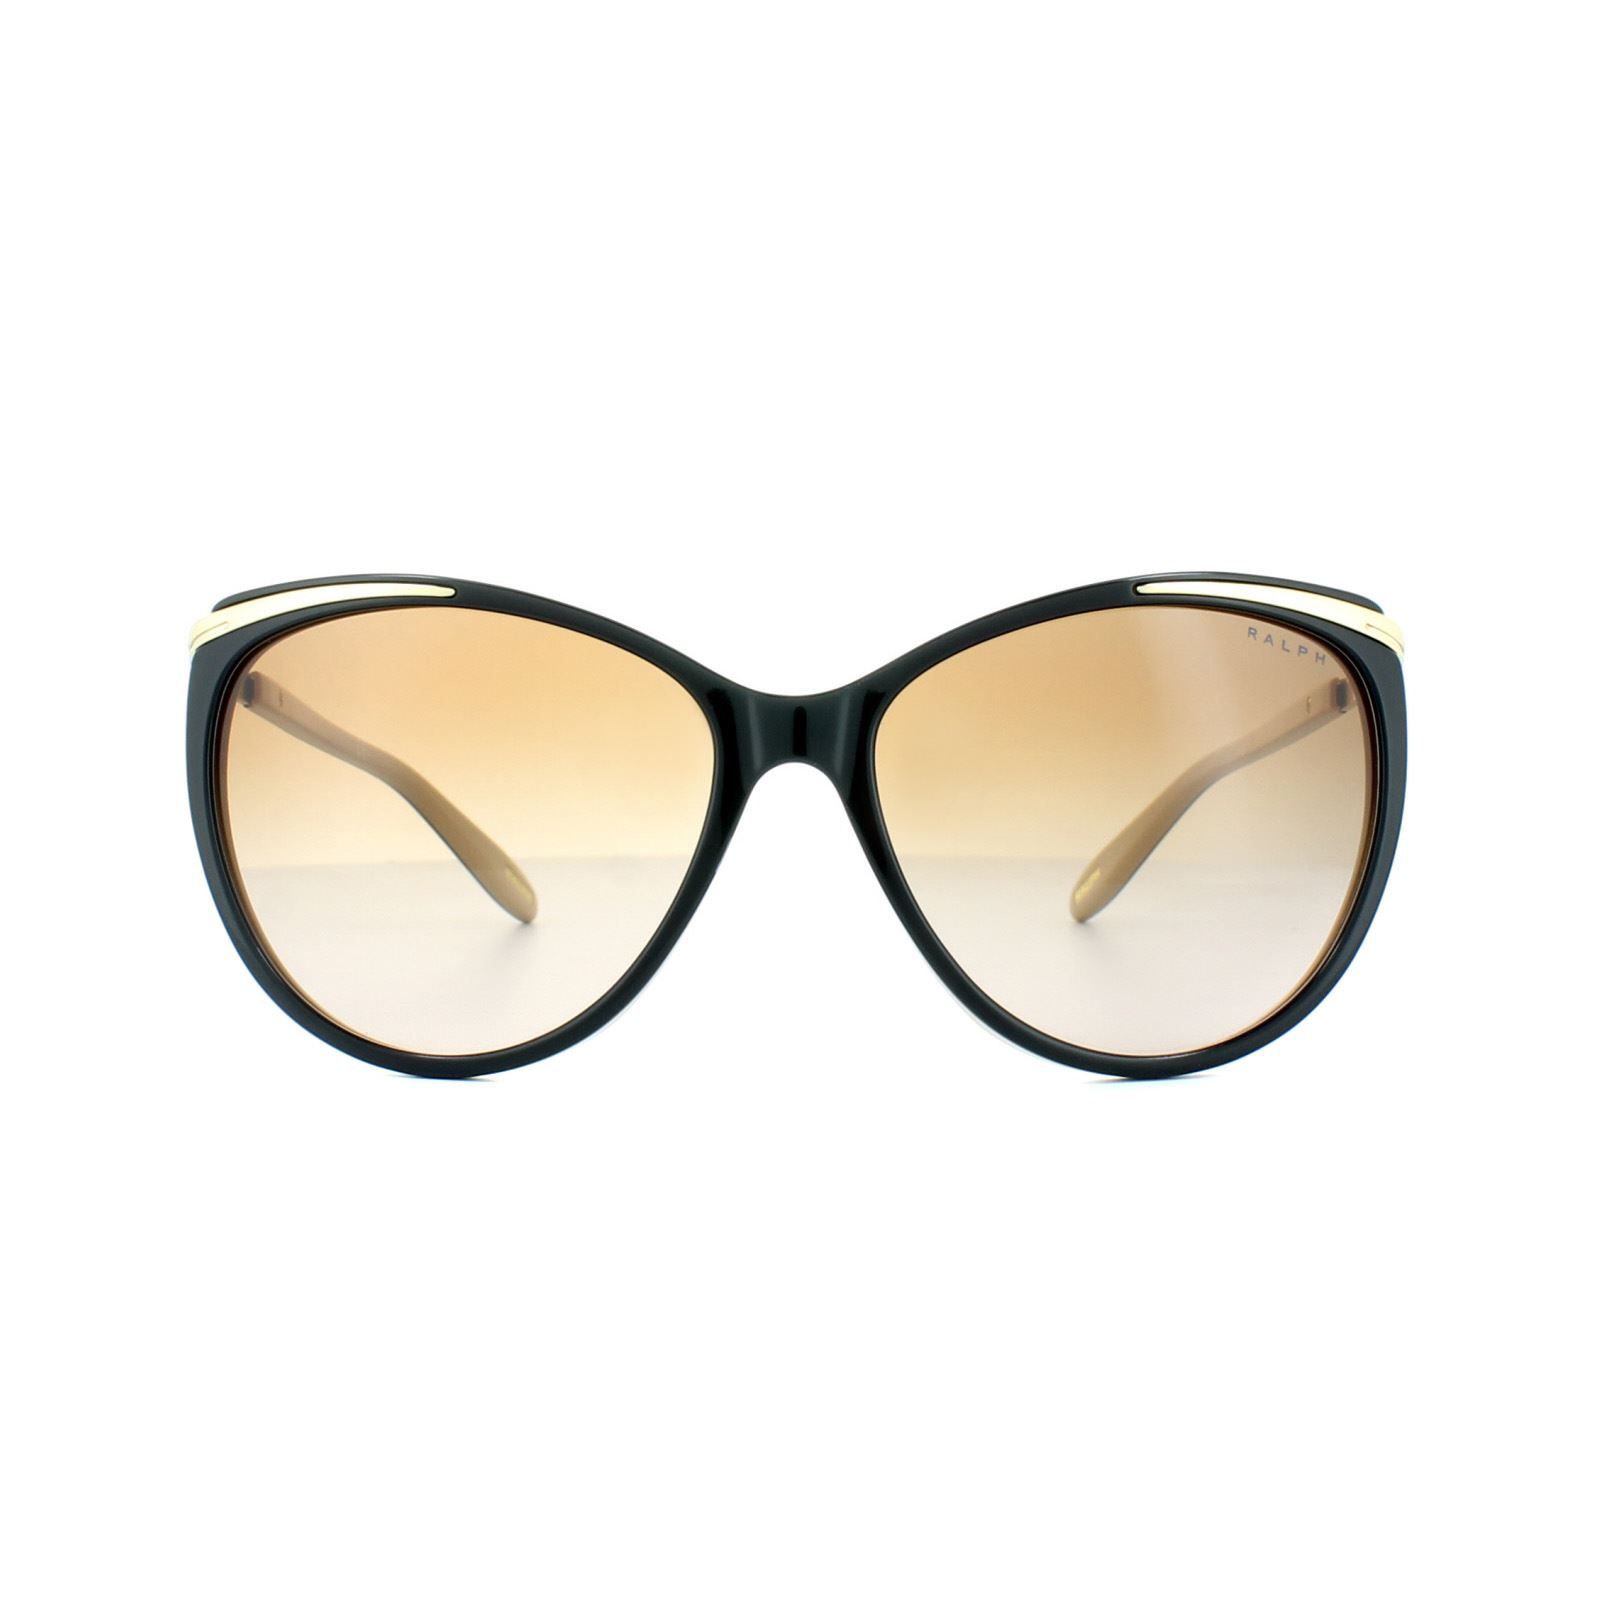 Ralph by Ralph Lauren Sunglasses 5150 109013 Dark Brown Brown Orange Gradient are an oversized cat's eye shape with the lifted corners enhanced by metal from the temples continuing round onto the front corners in a really classy detail what works so well and highlights the Ralph logo nicely too.